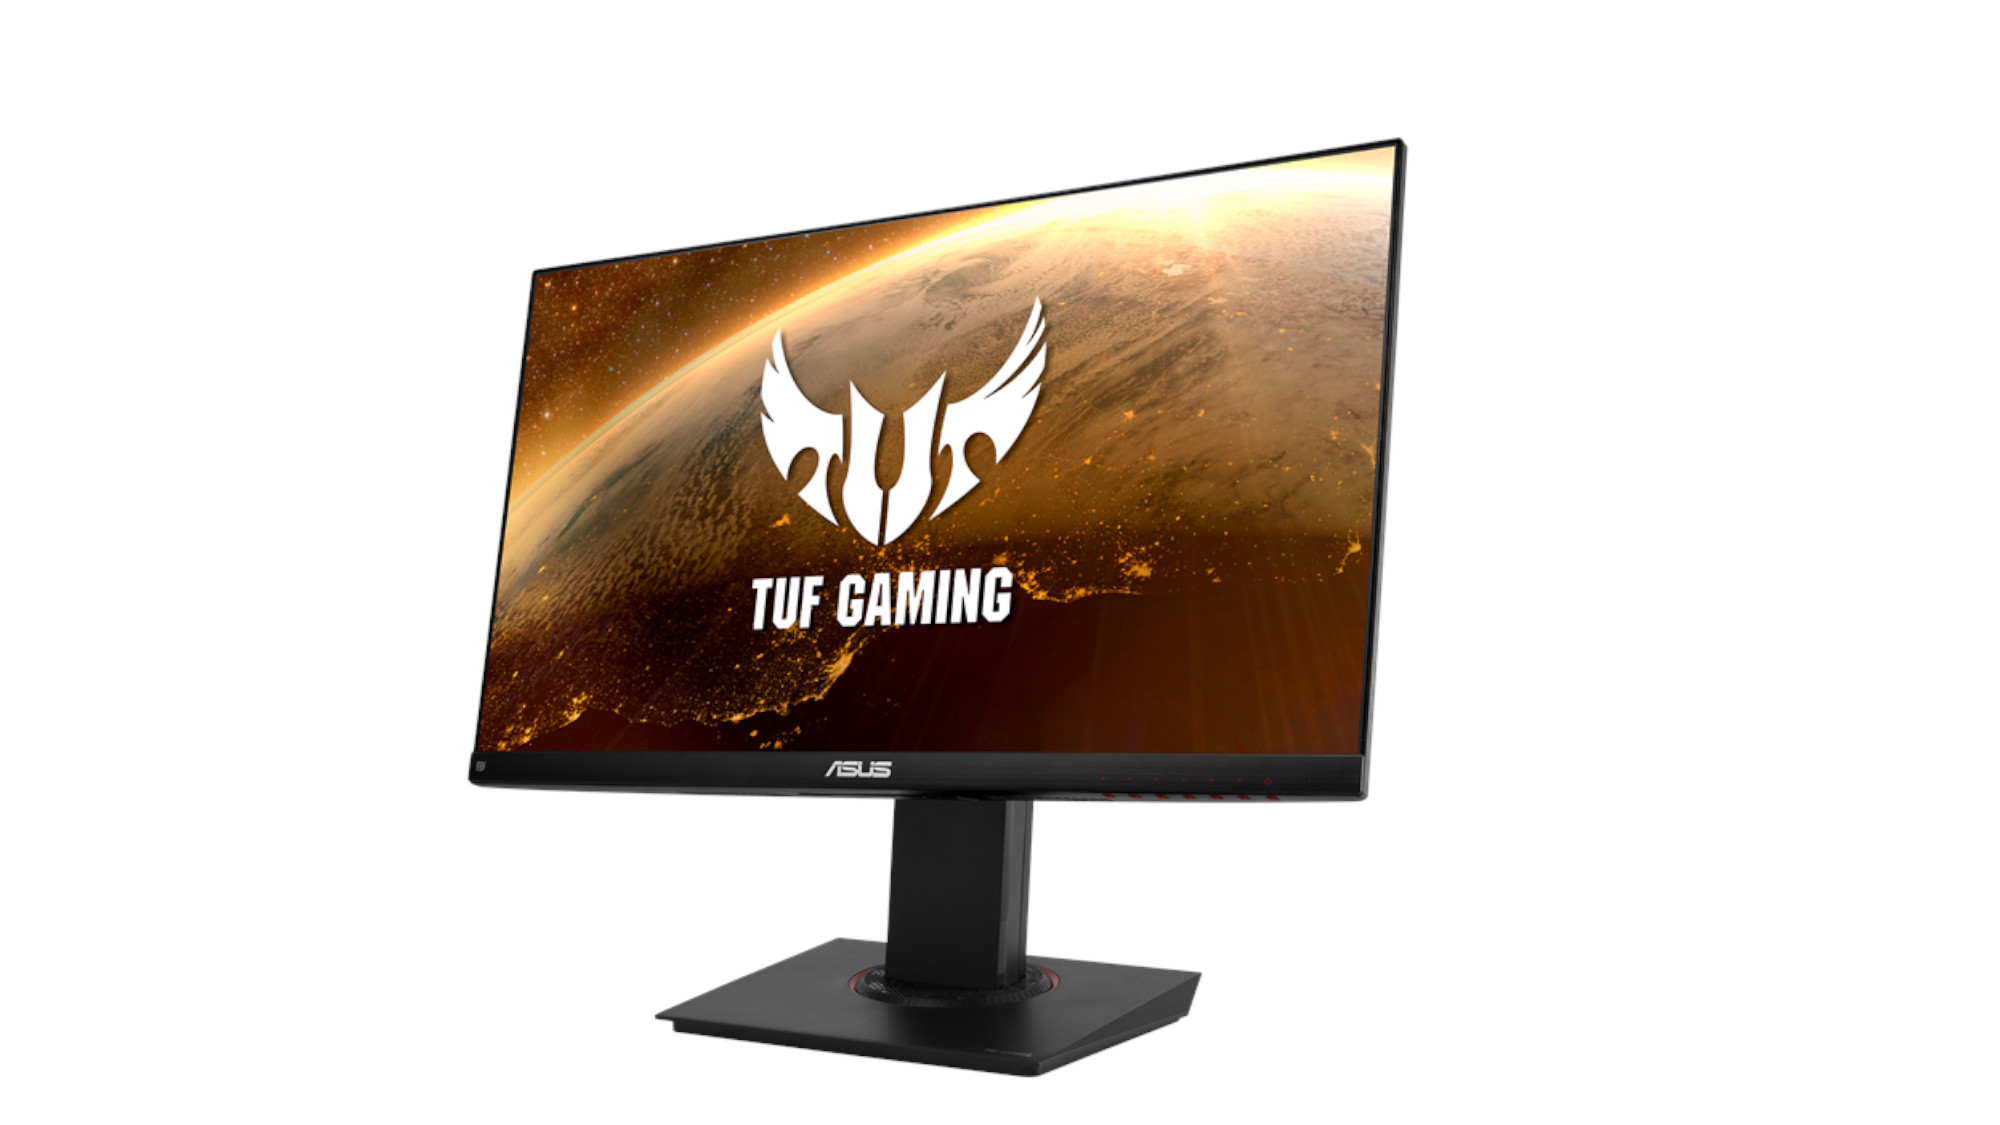 Asus TUF Gaming VG289Q monitor on a white background